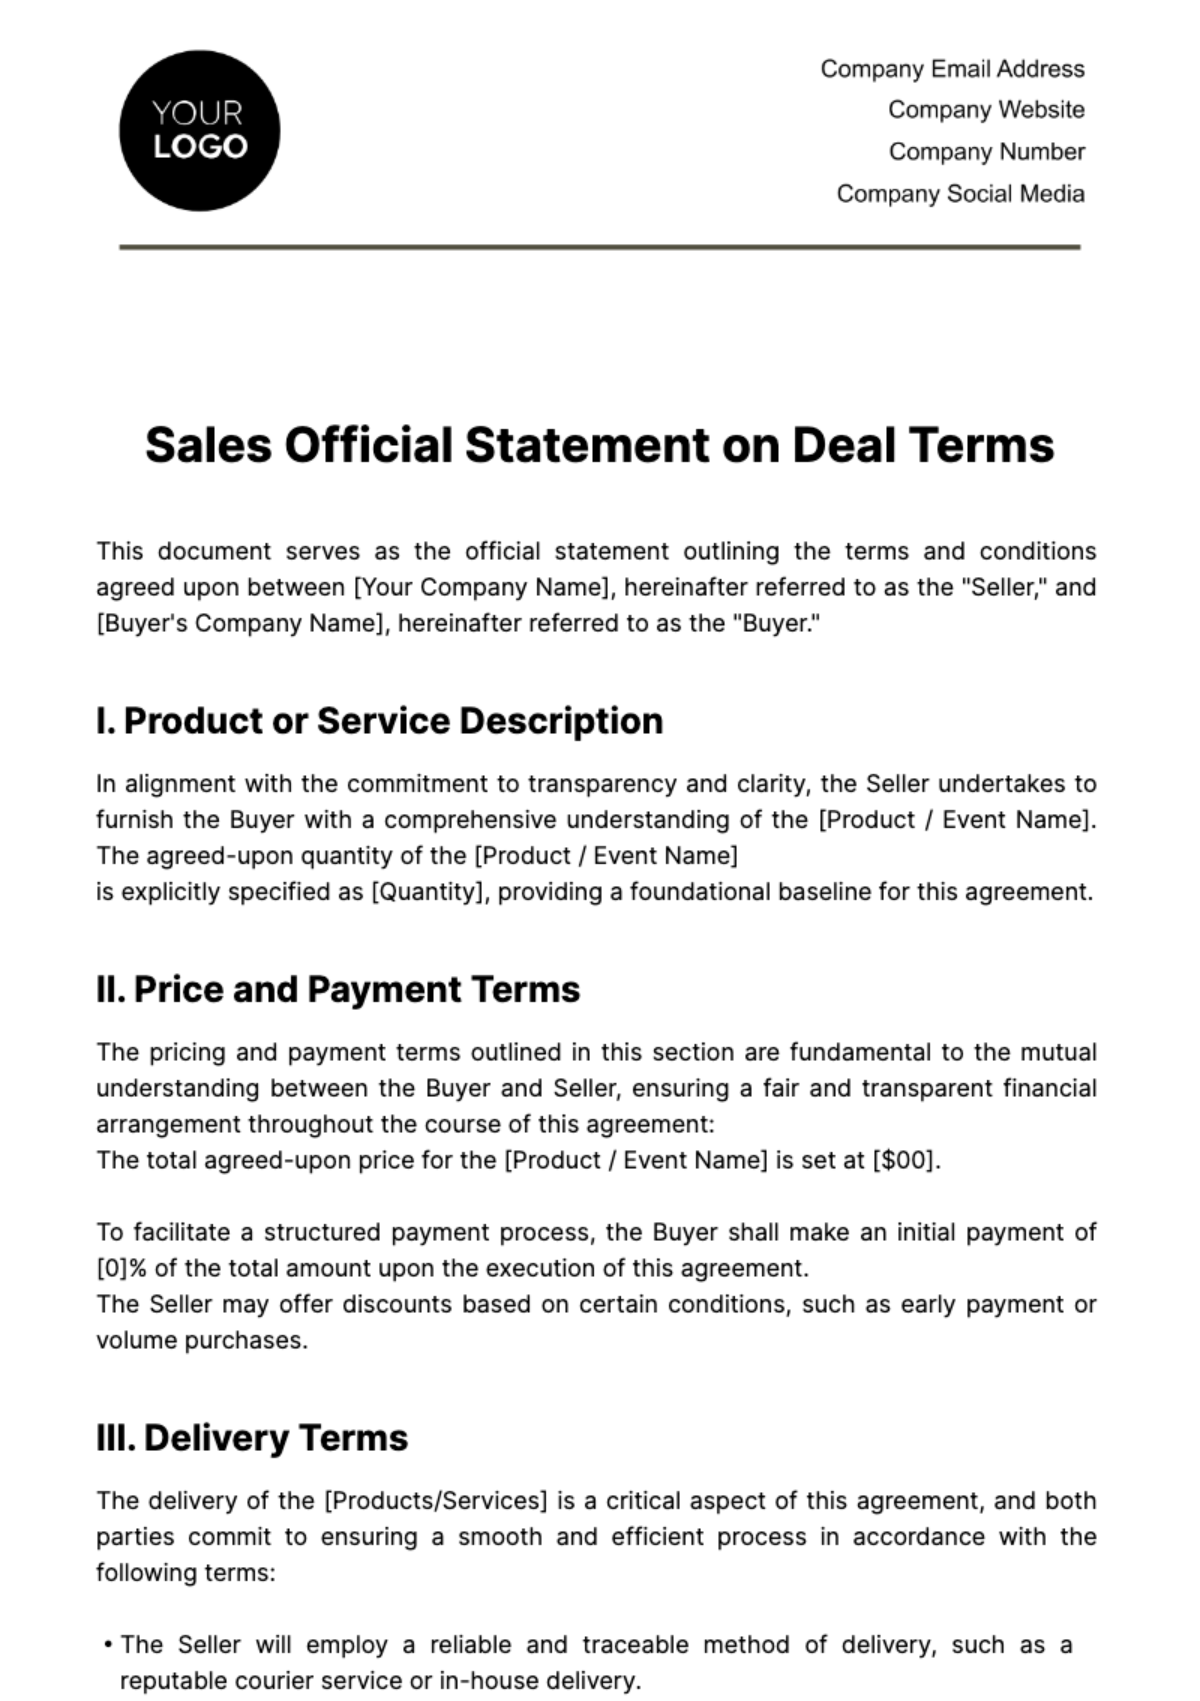 Sales Official Statement on Deal Terms Template